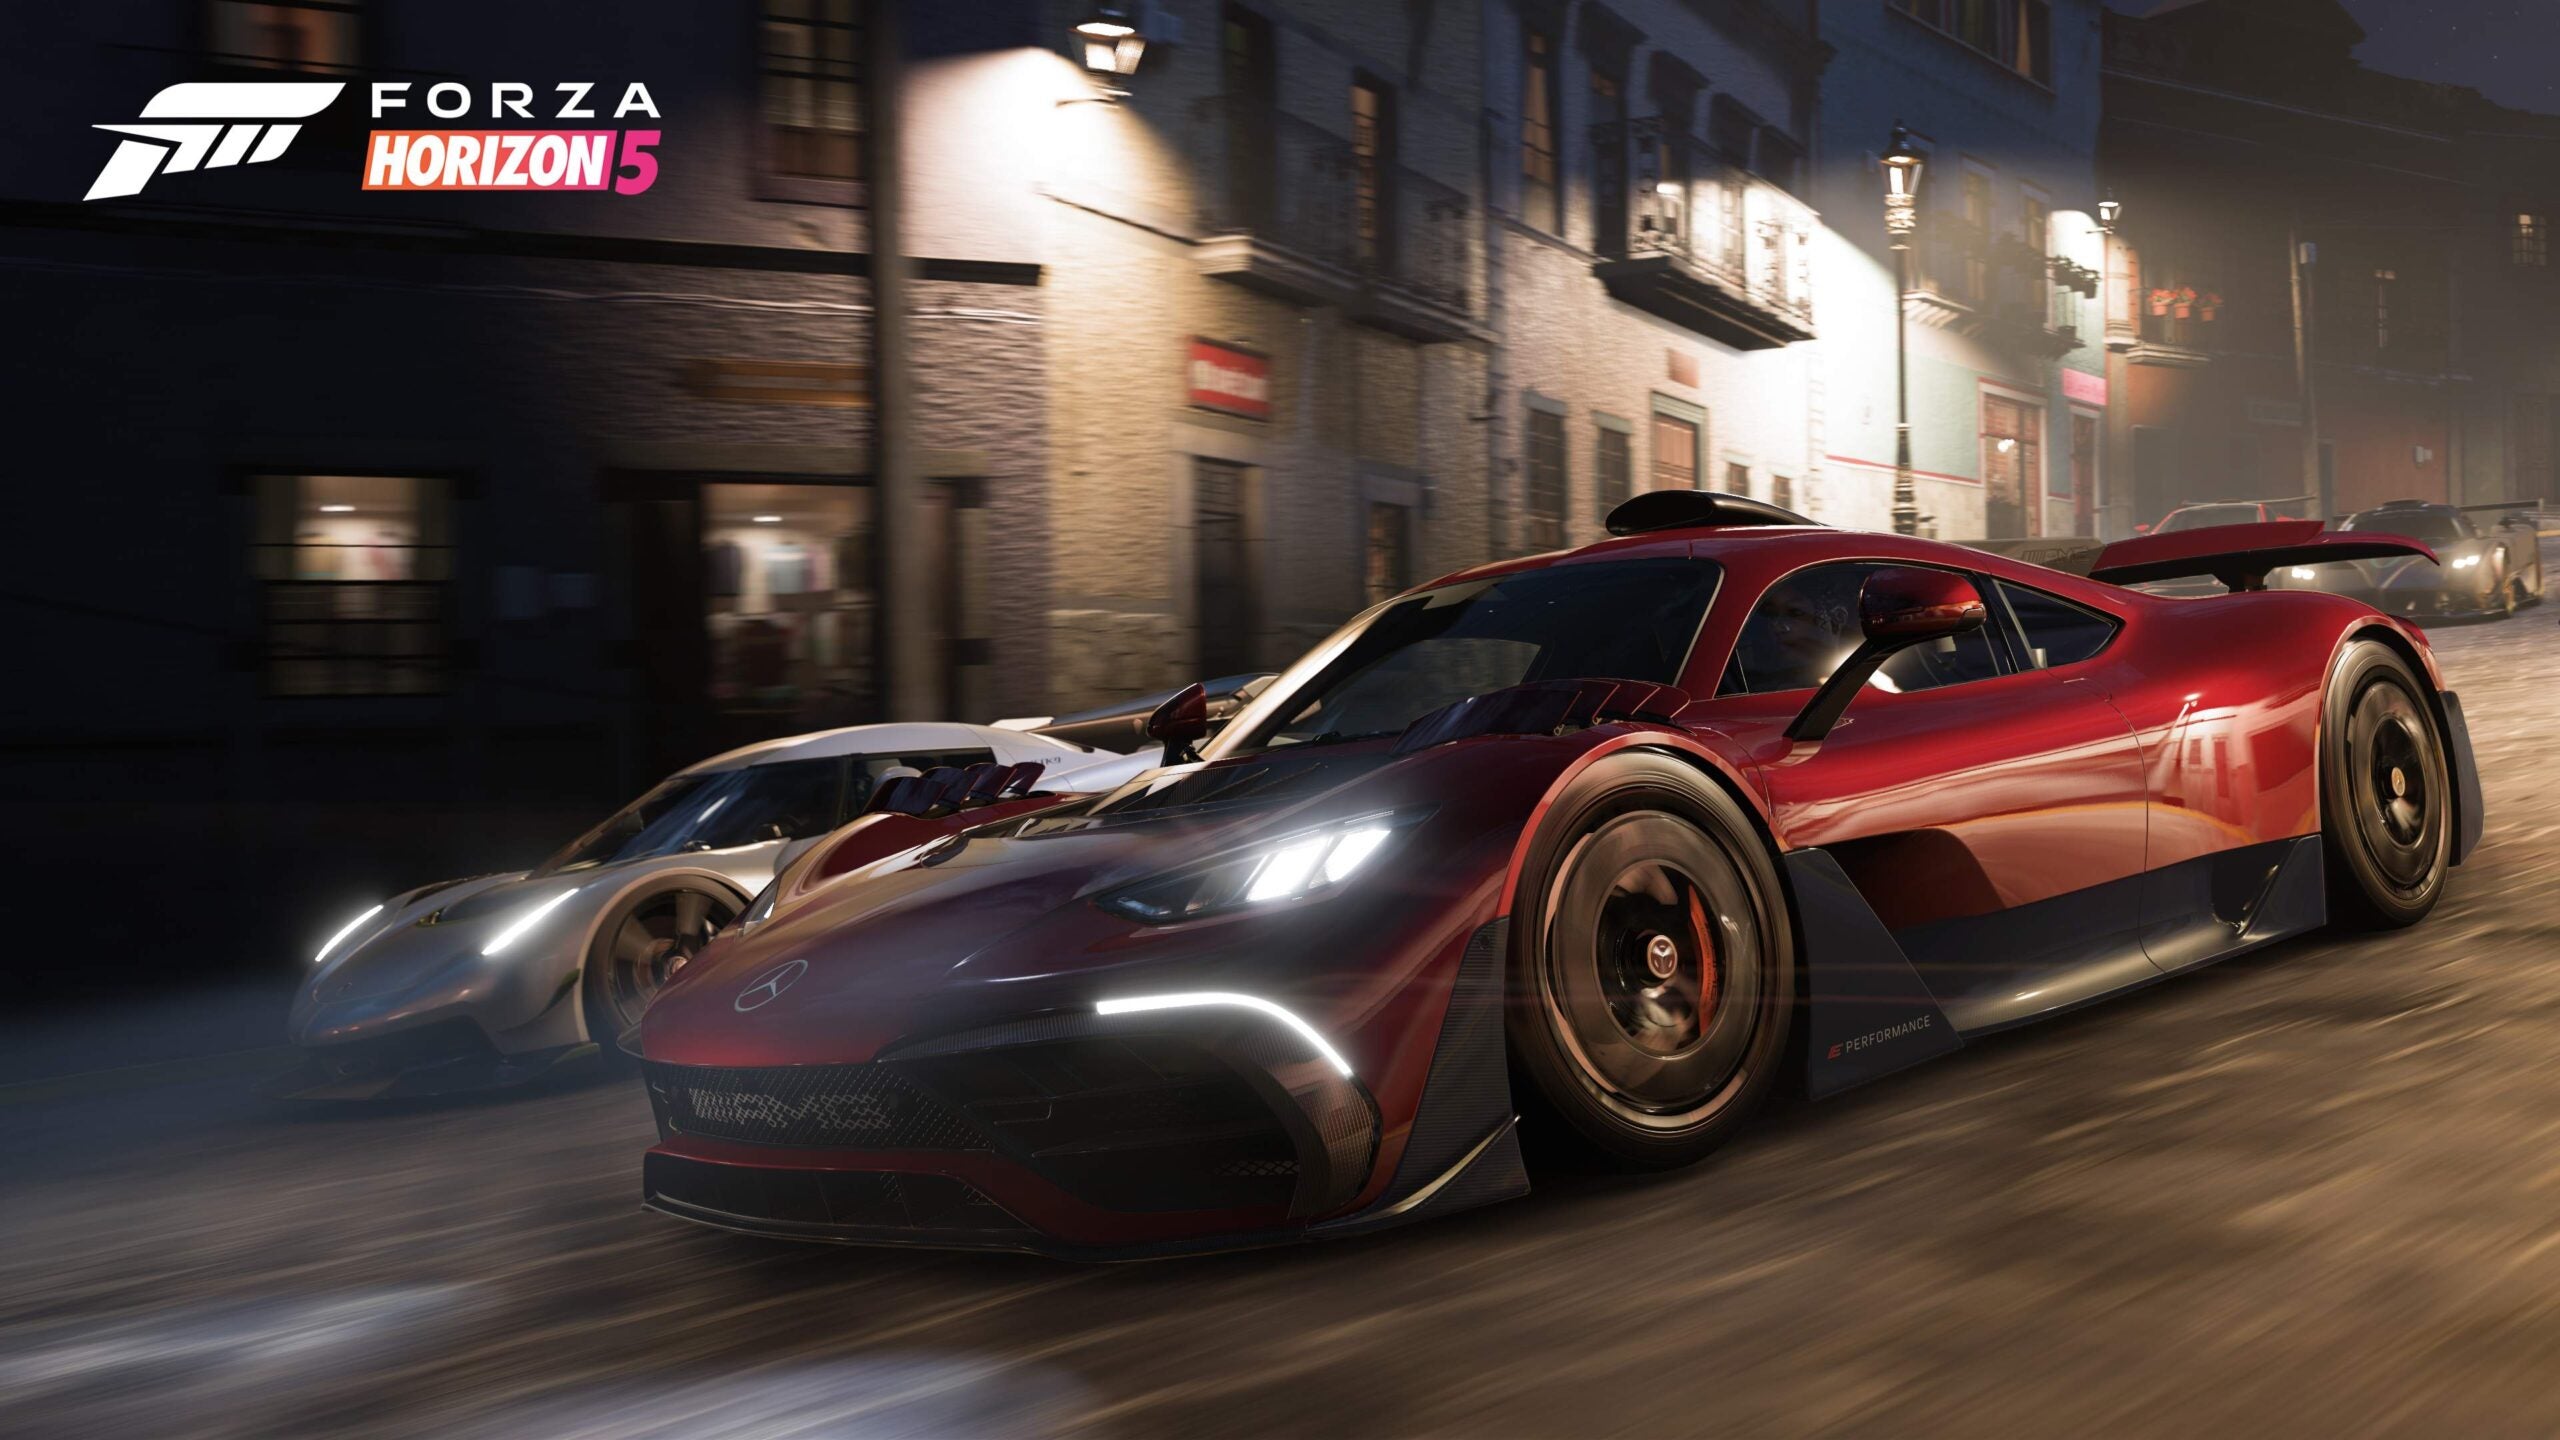 New Forza Horizon 5 gameplay trailer and custom controller unveiled at